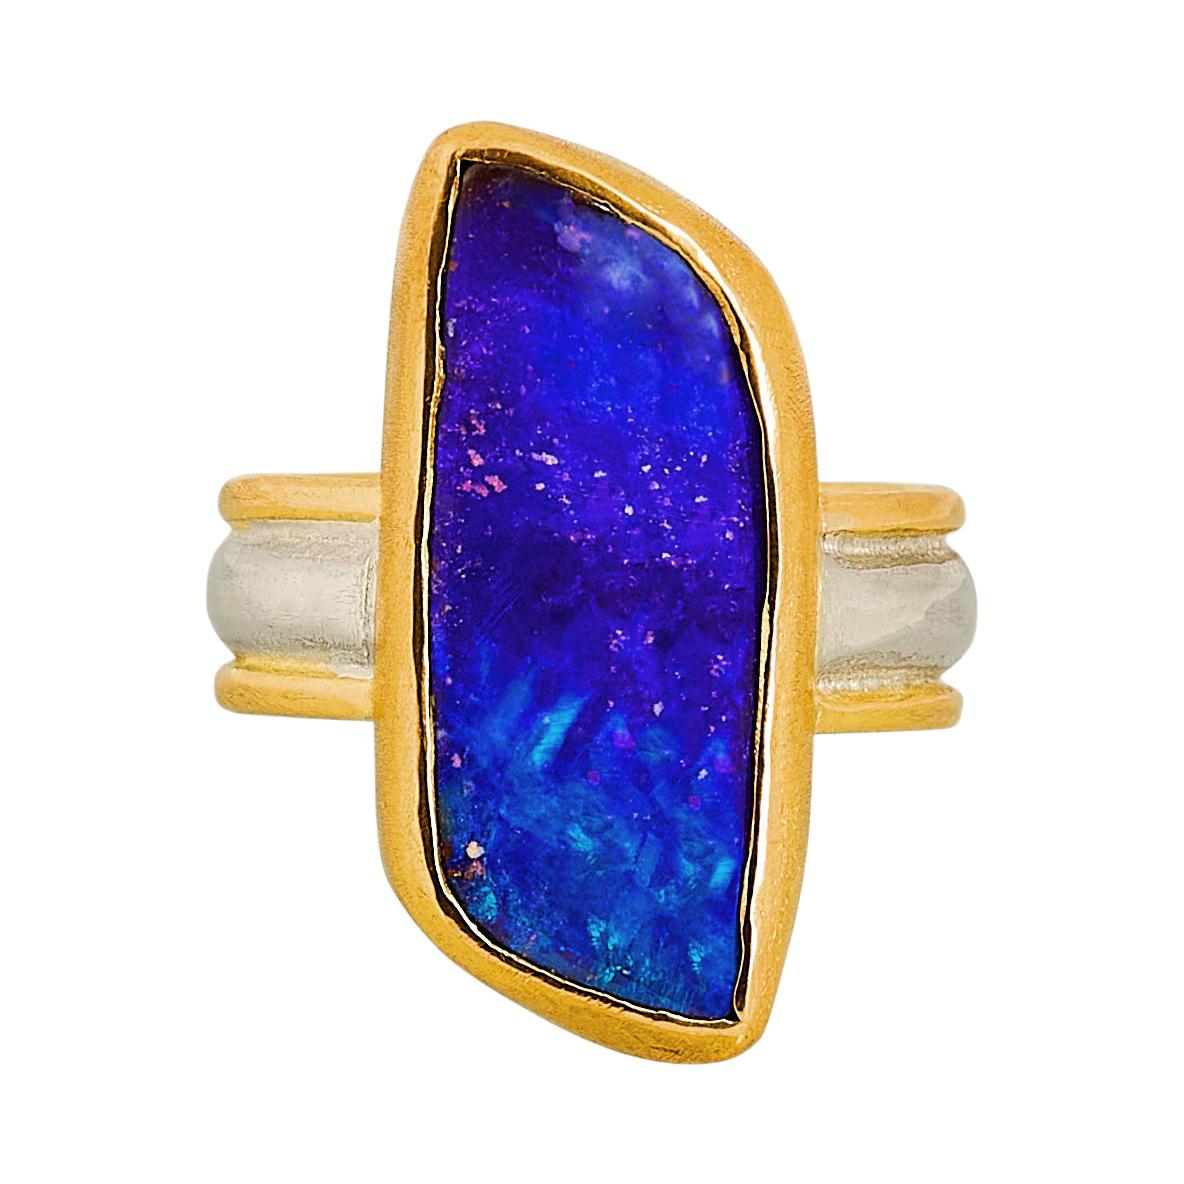 Deep Blue Boulder Opal Cocktail Ring in 22 and 18 Karat Yellow Gold with Silver